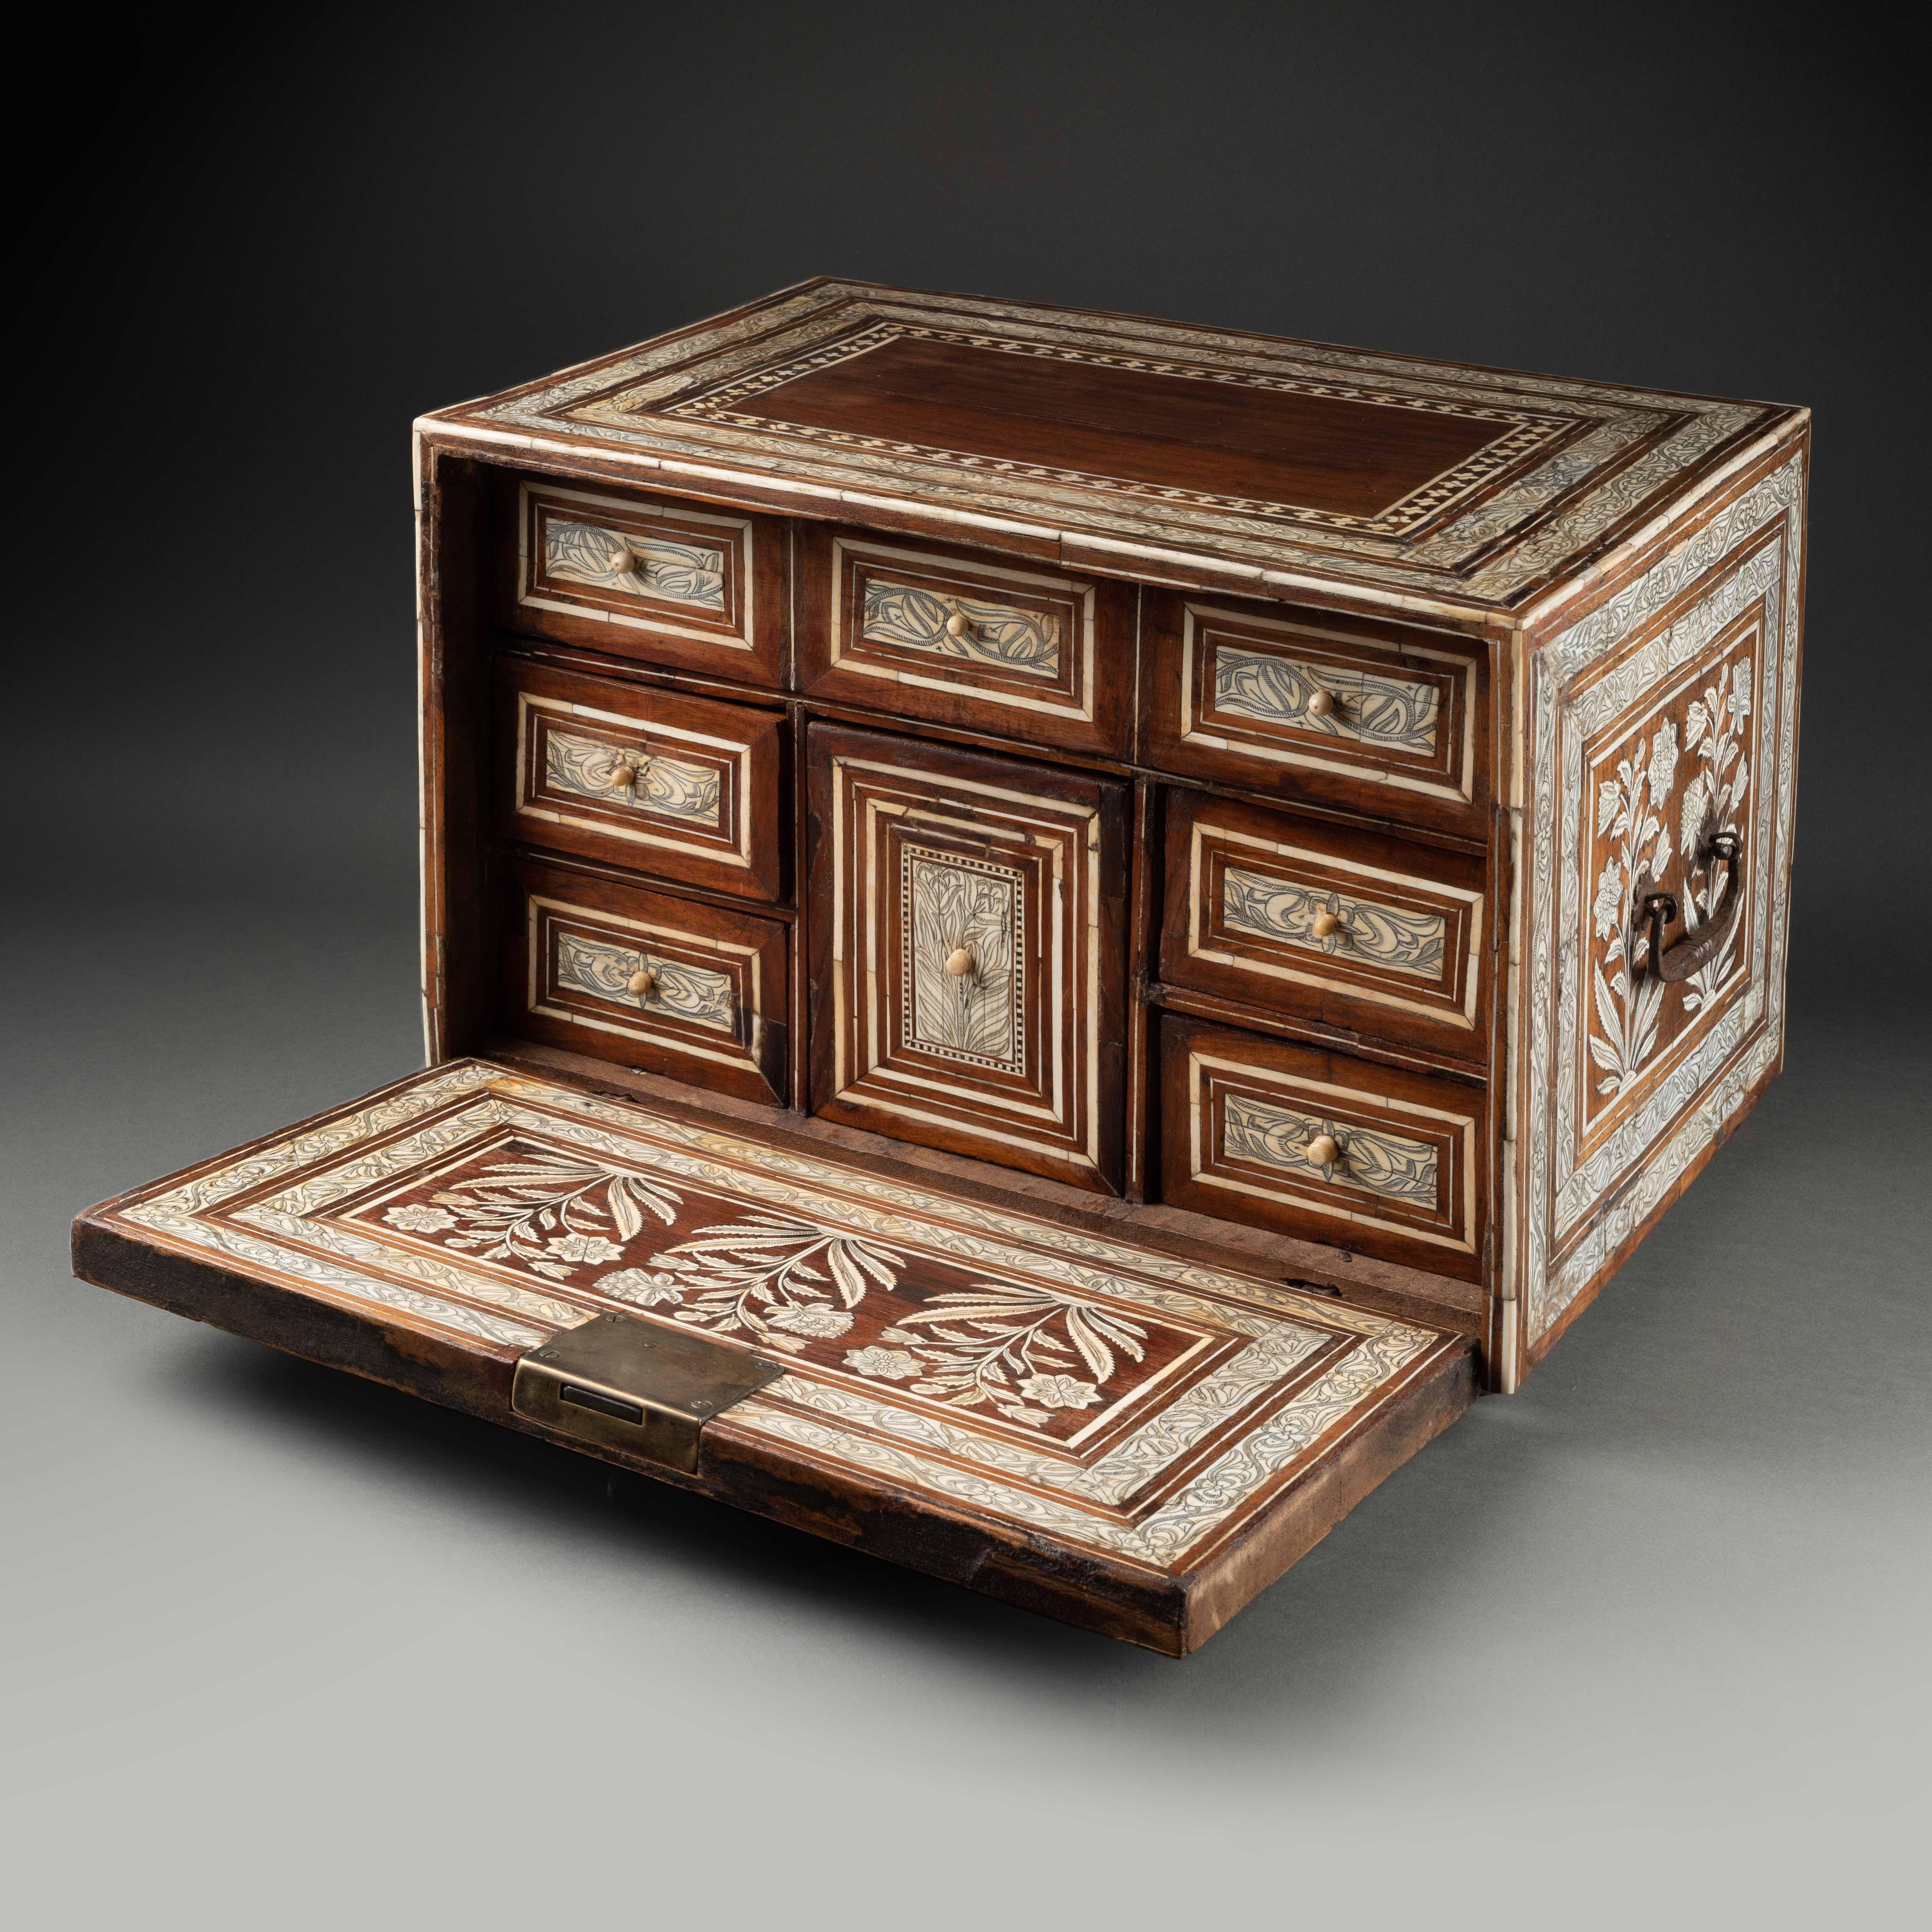 A Mughal ivory inlaid wood Cabinet
Noord-West Indie
17th century
27 x 40,2 x 30 cm
Cites number : 2023/BE00124/CE


Of rectangular form with fall-front opening profusely decorated in ivory inlay; sides with rectangular panels containing large